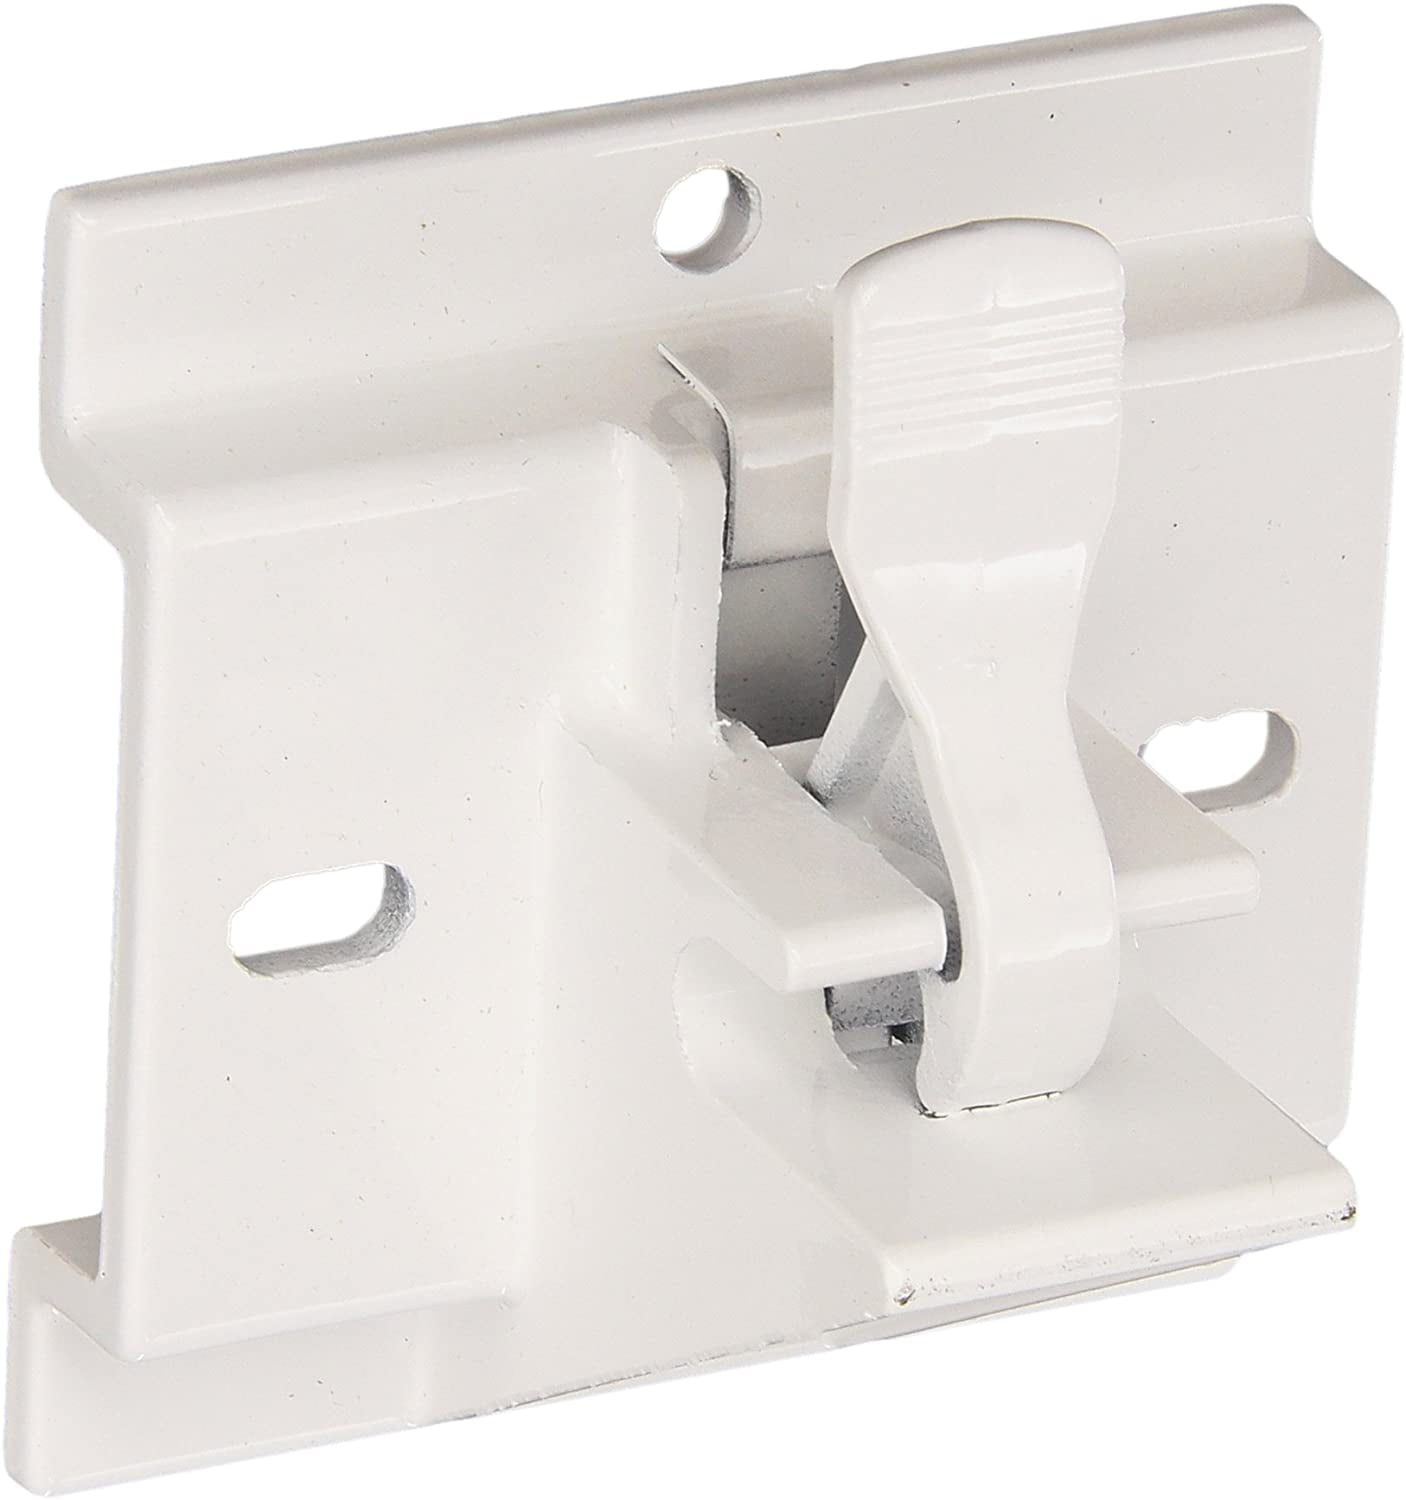 Carefree Fiesta RV Awning Replacement Metal Remote Lock-Replace Your Plastic Remote Lock with Metal. 